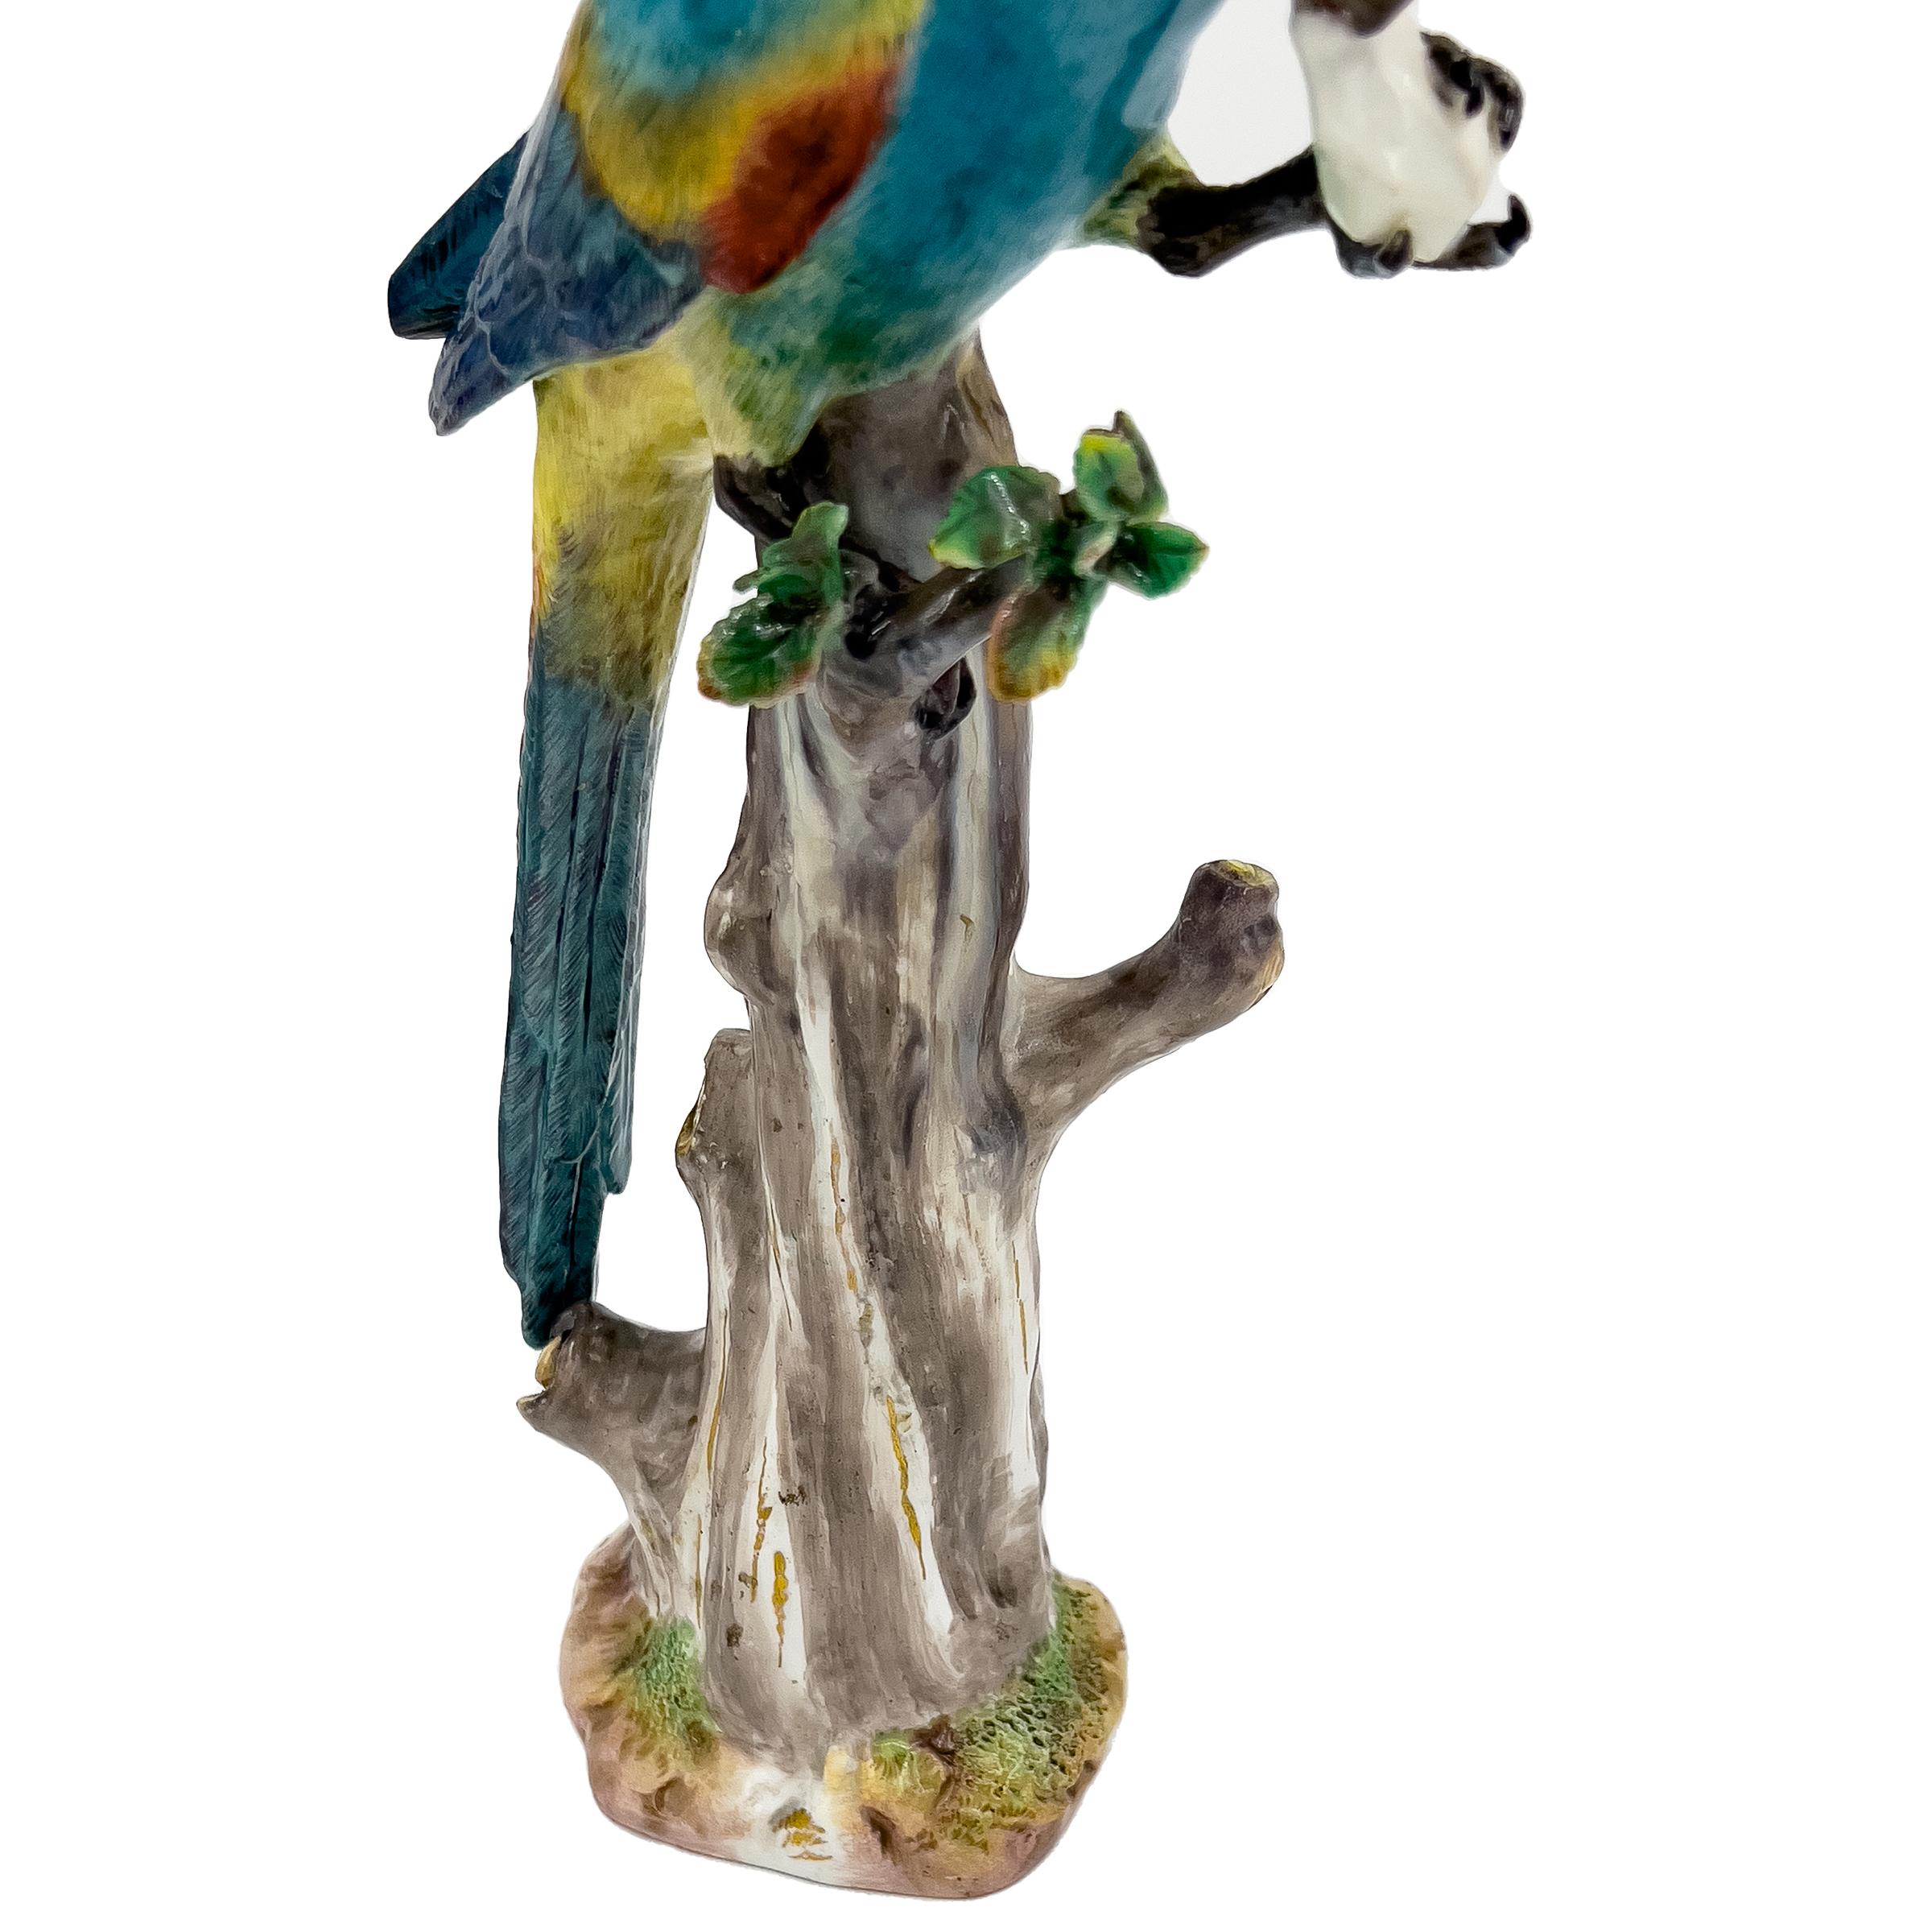 Porcelain 19th Century Meissen Animal Figurine of a Colourful Parrot Feasting on Tree